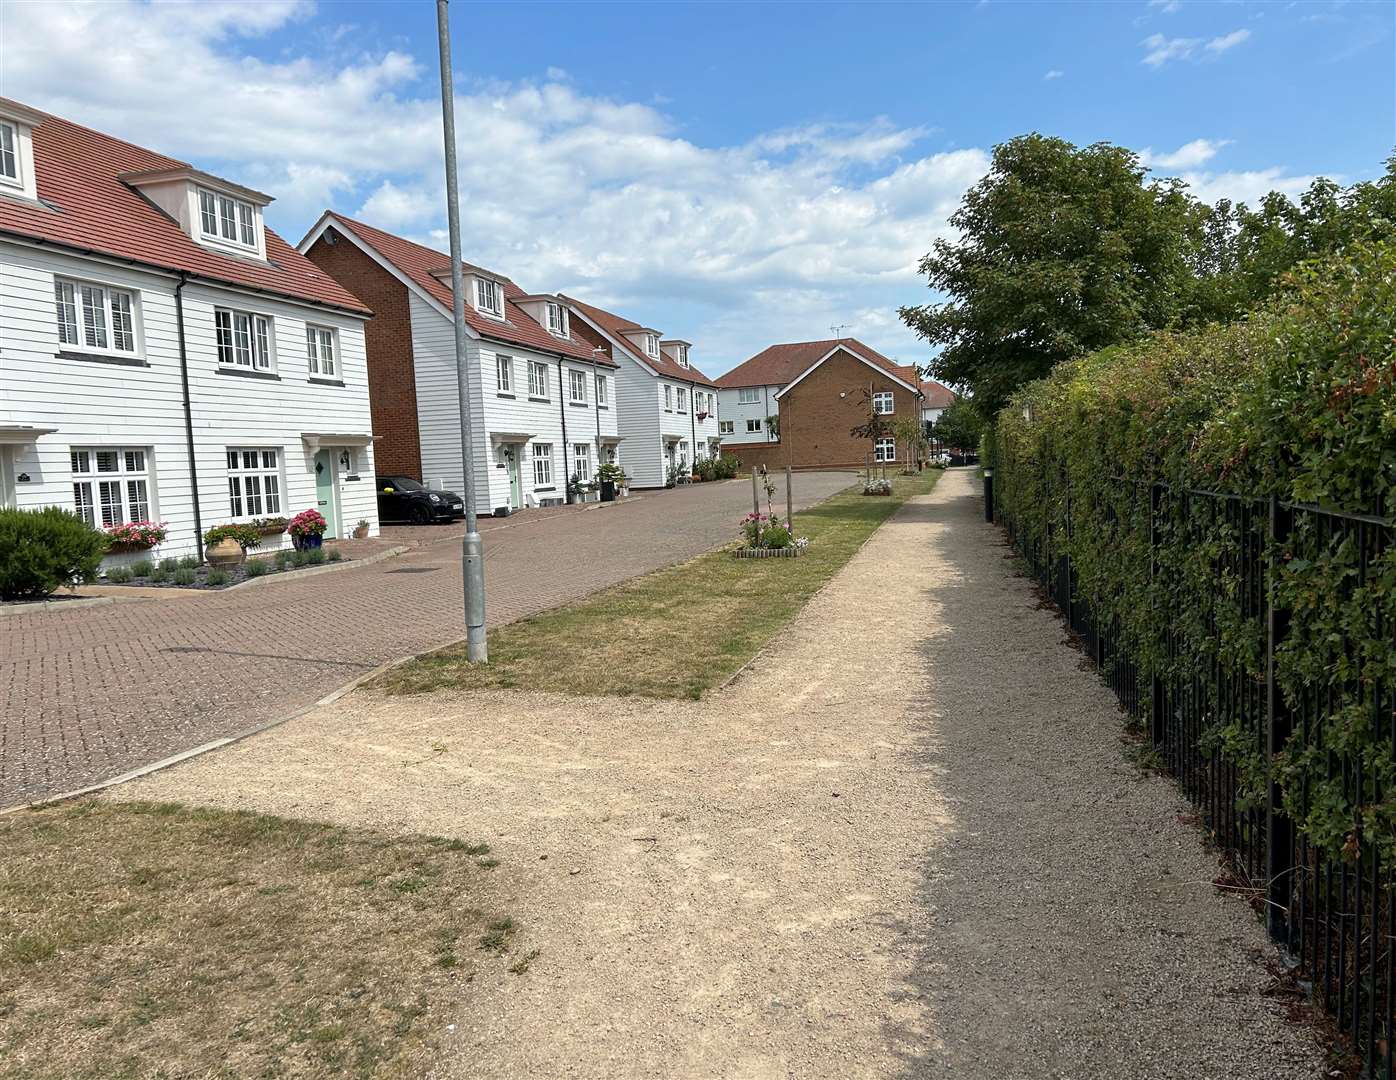 Lakeside Avenue in Faversham has a path which Kent County Council says is not a public right of way